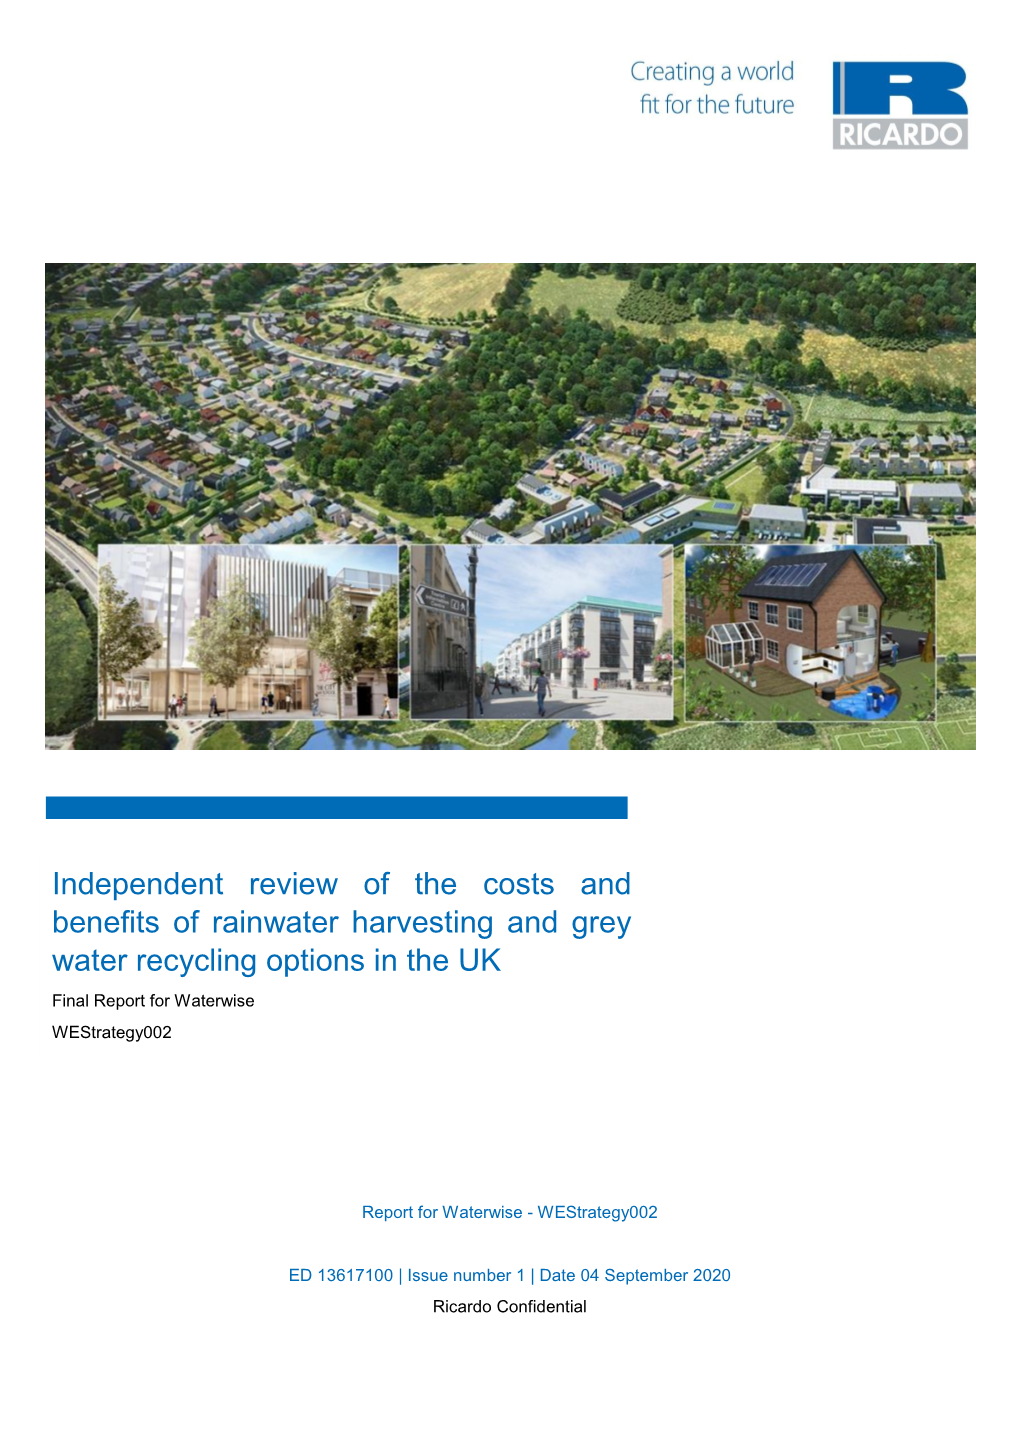 Independent Review of the Costs and Benefits of Rainwater Harvesting and Grey Water Recycling Options in the UK Final Report for Waterwise Westrategy002